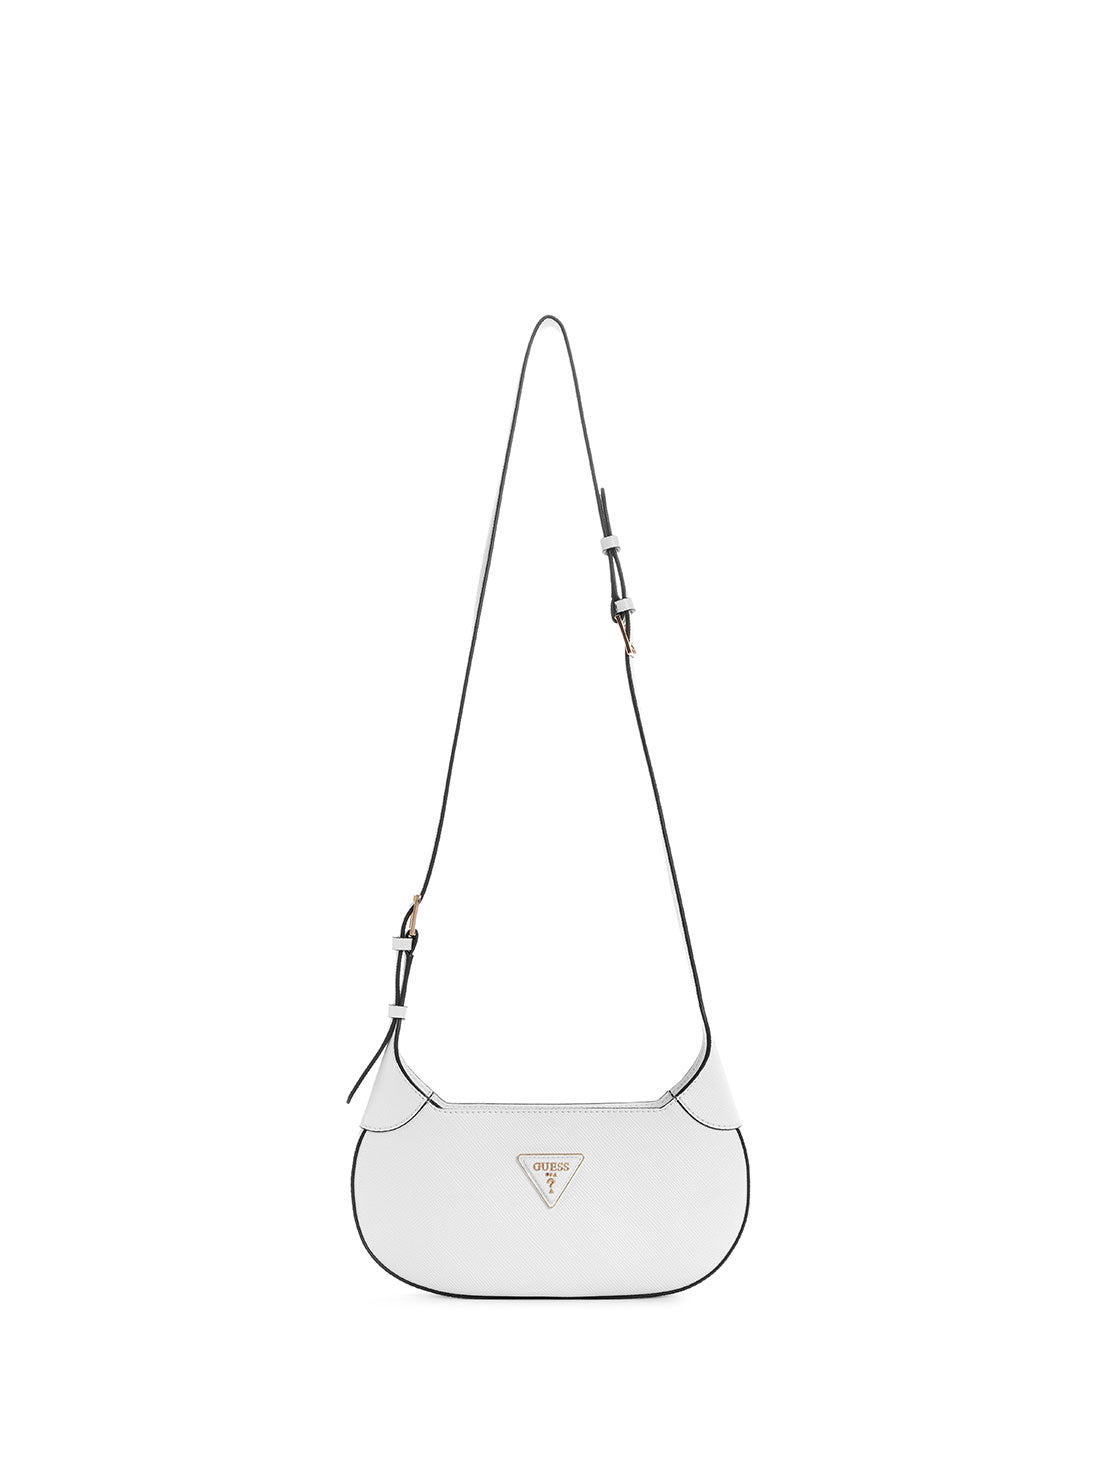 GUESS White Avis Crossbody Bag front view